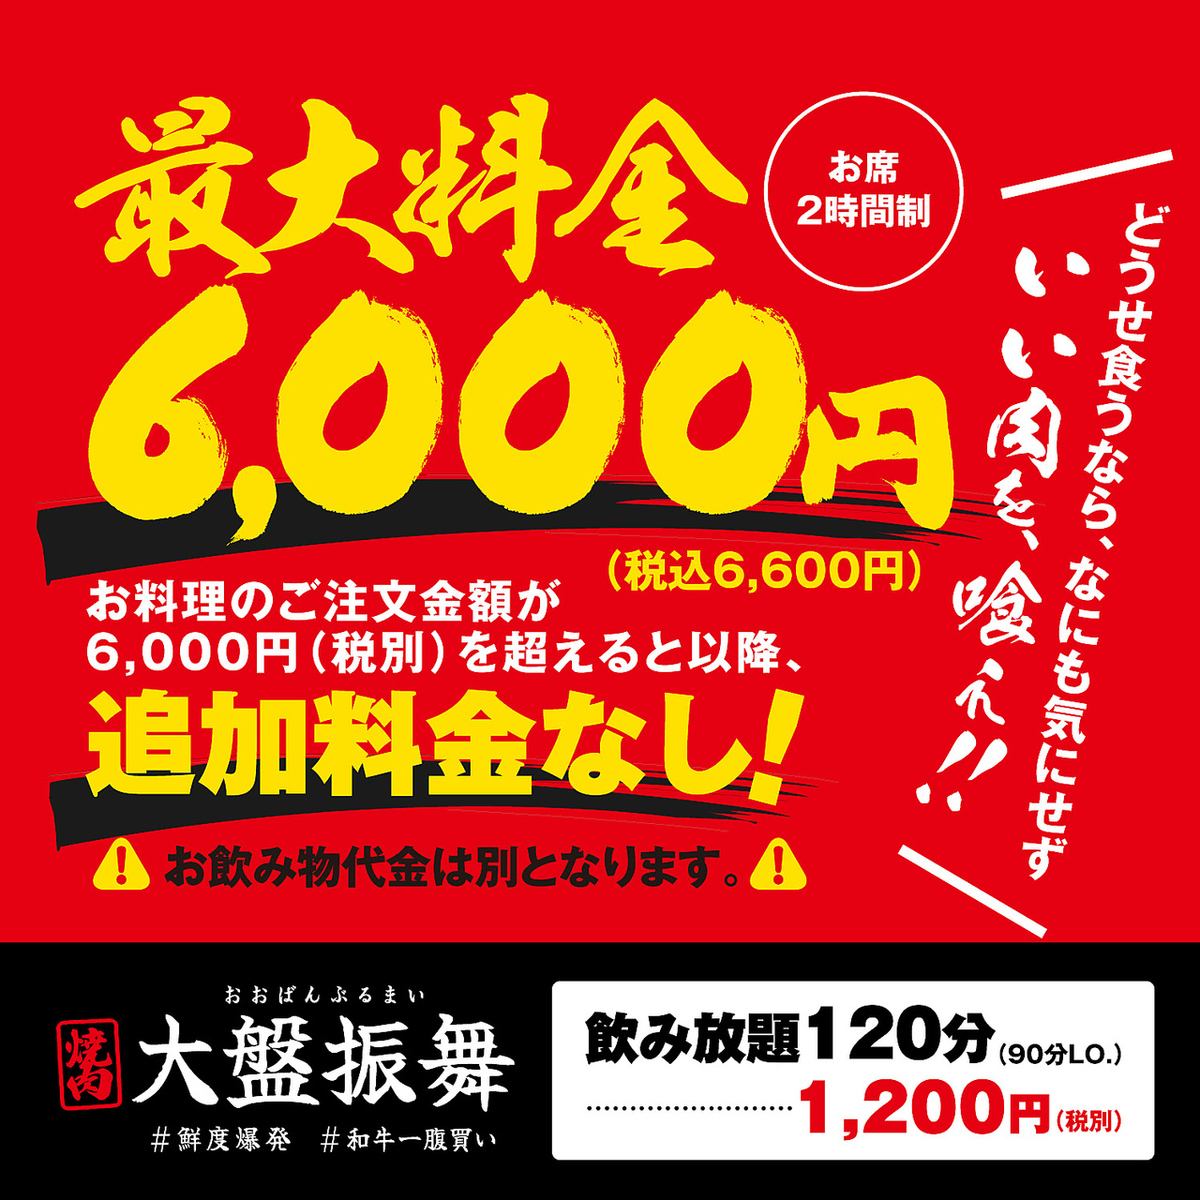 Fixed price yakiniku! We will not accept meals exceeding 6,600 yen (tax included) per person! Drinks are not included.